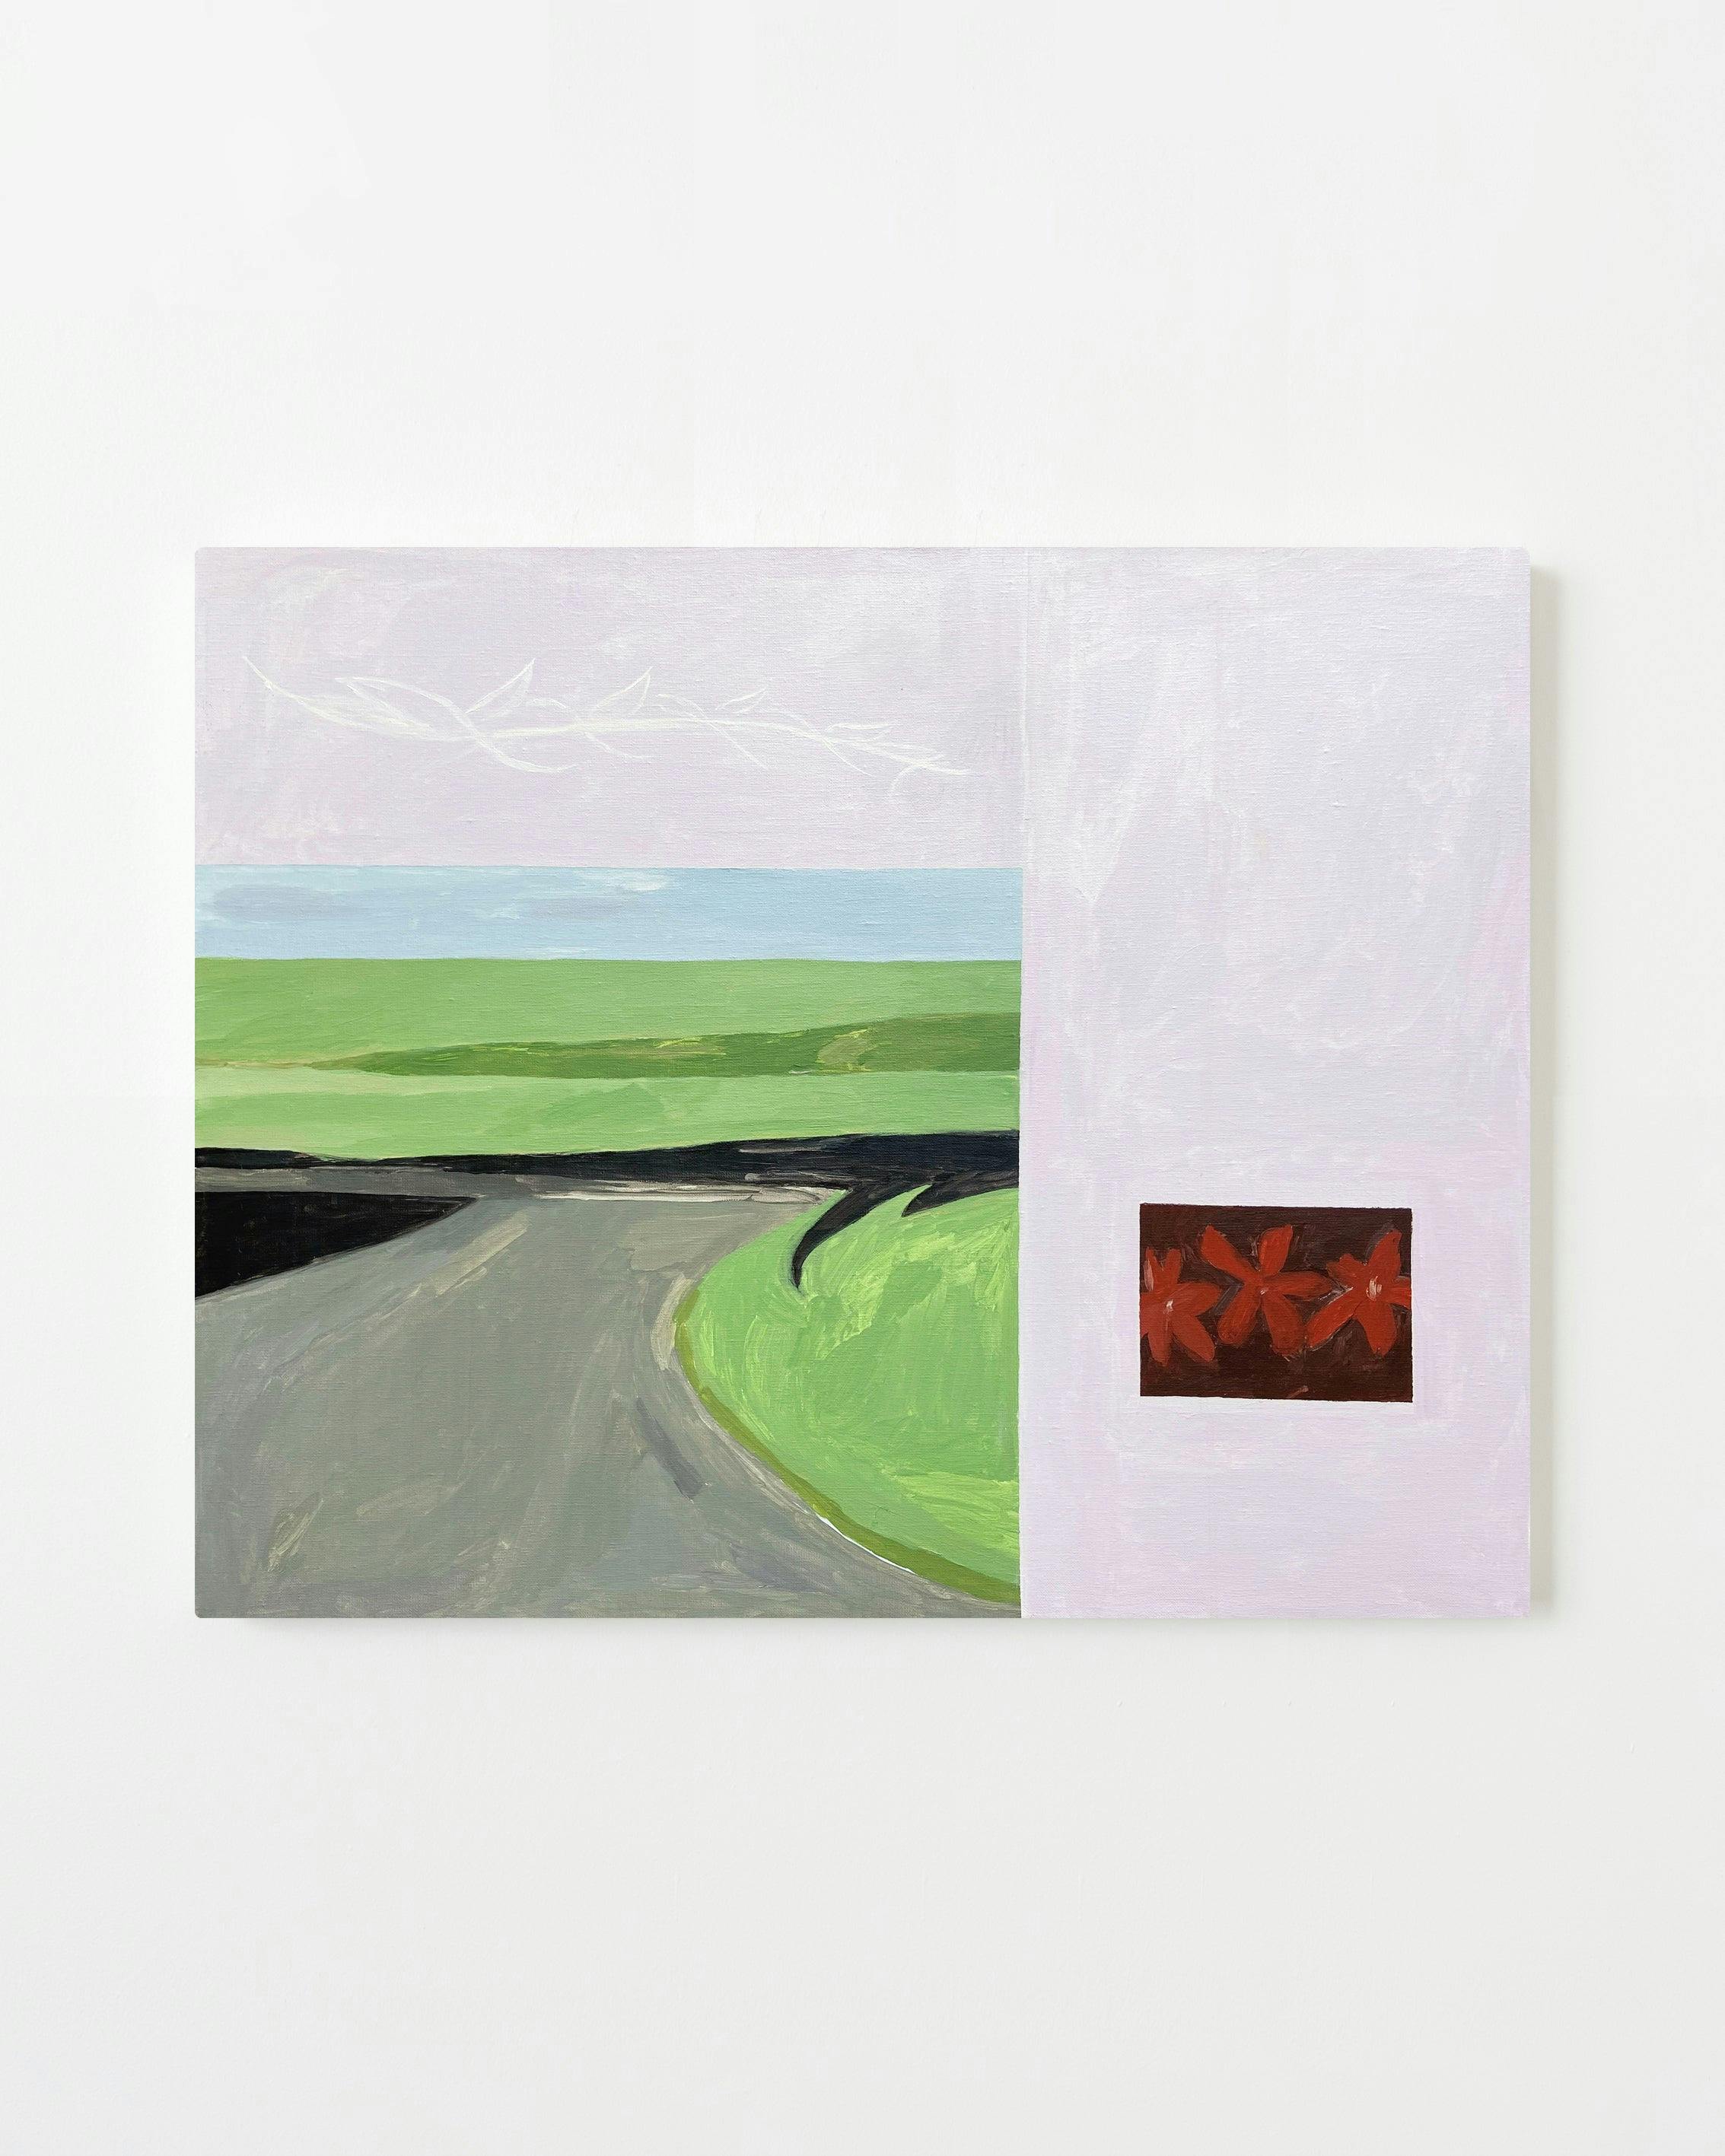 Painting by Alma Charry titled "route+marie anne".